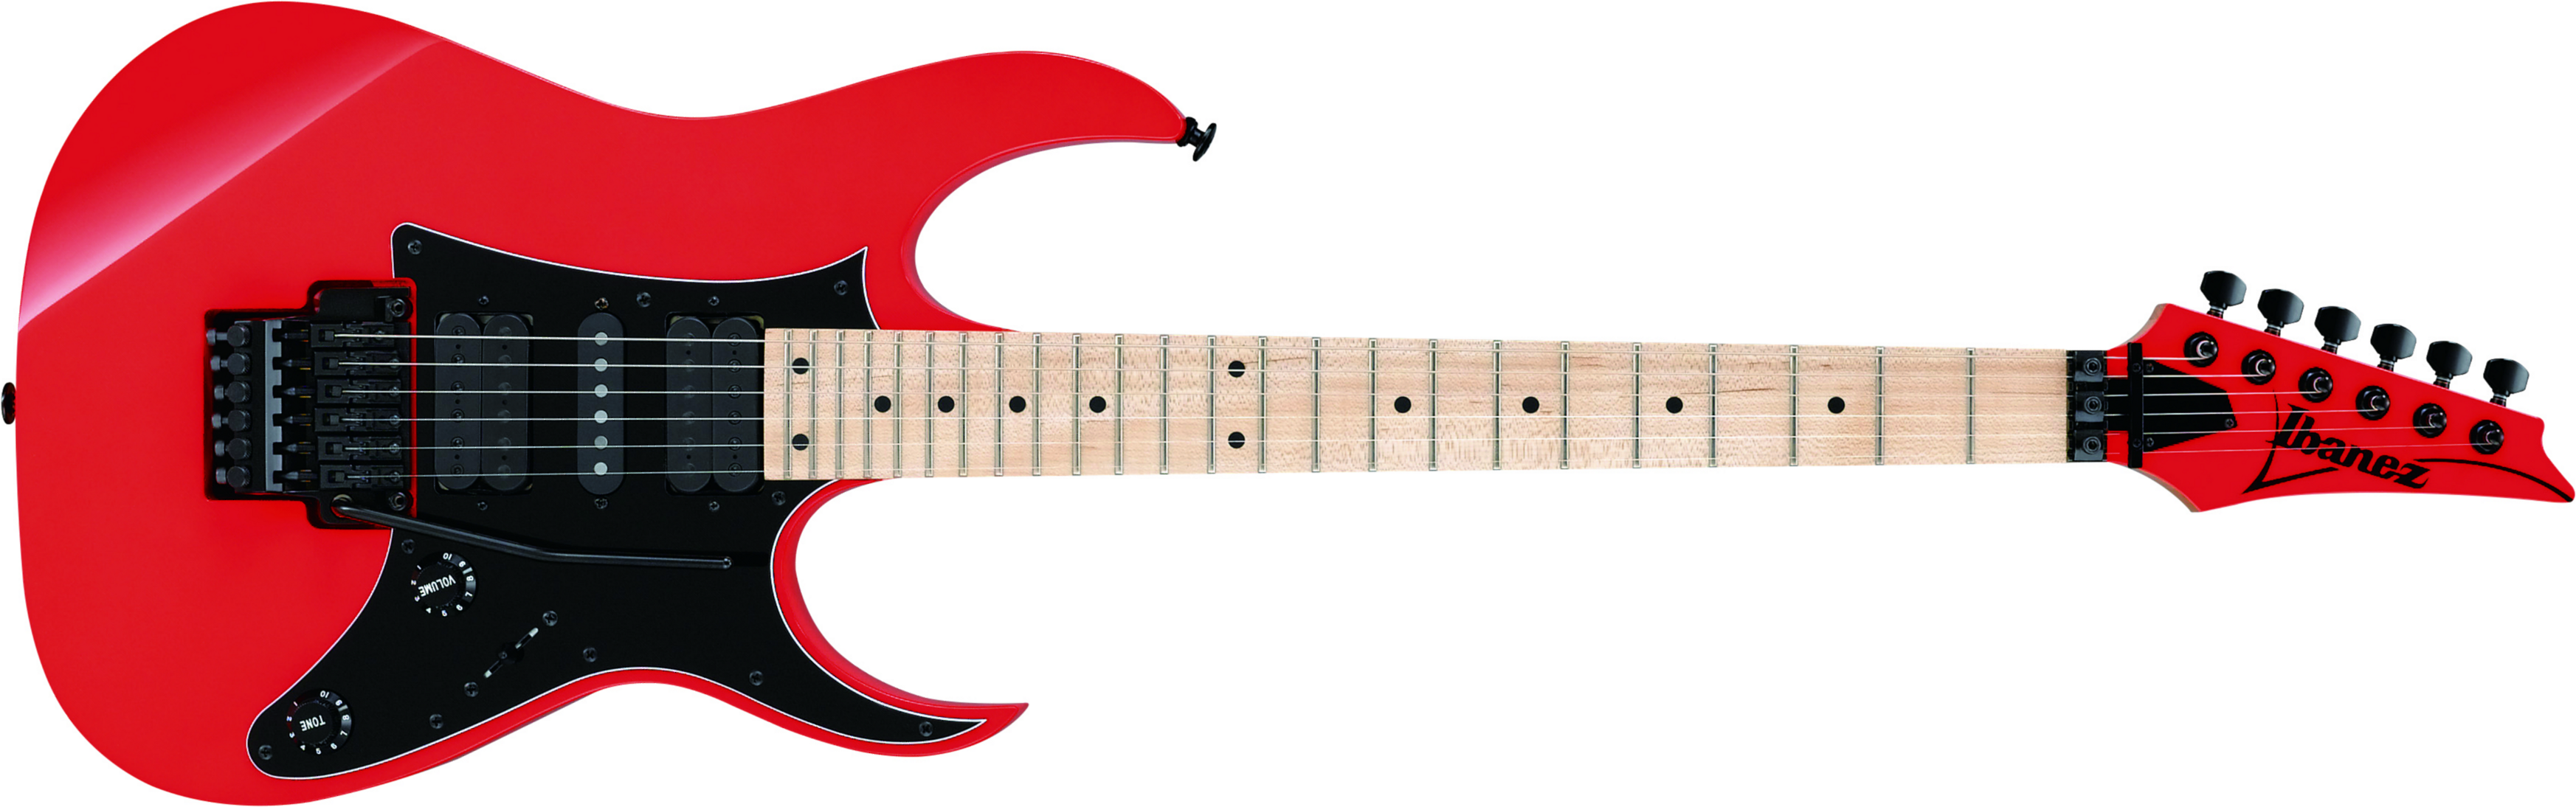 Ibanez Rg550 Rf Genesis Japon Hsh Fr Mn - Road Flare Red - Str shape electric guitar - Main picture